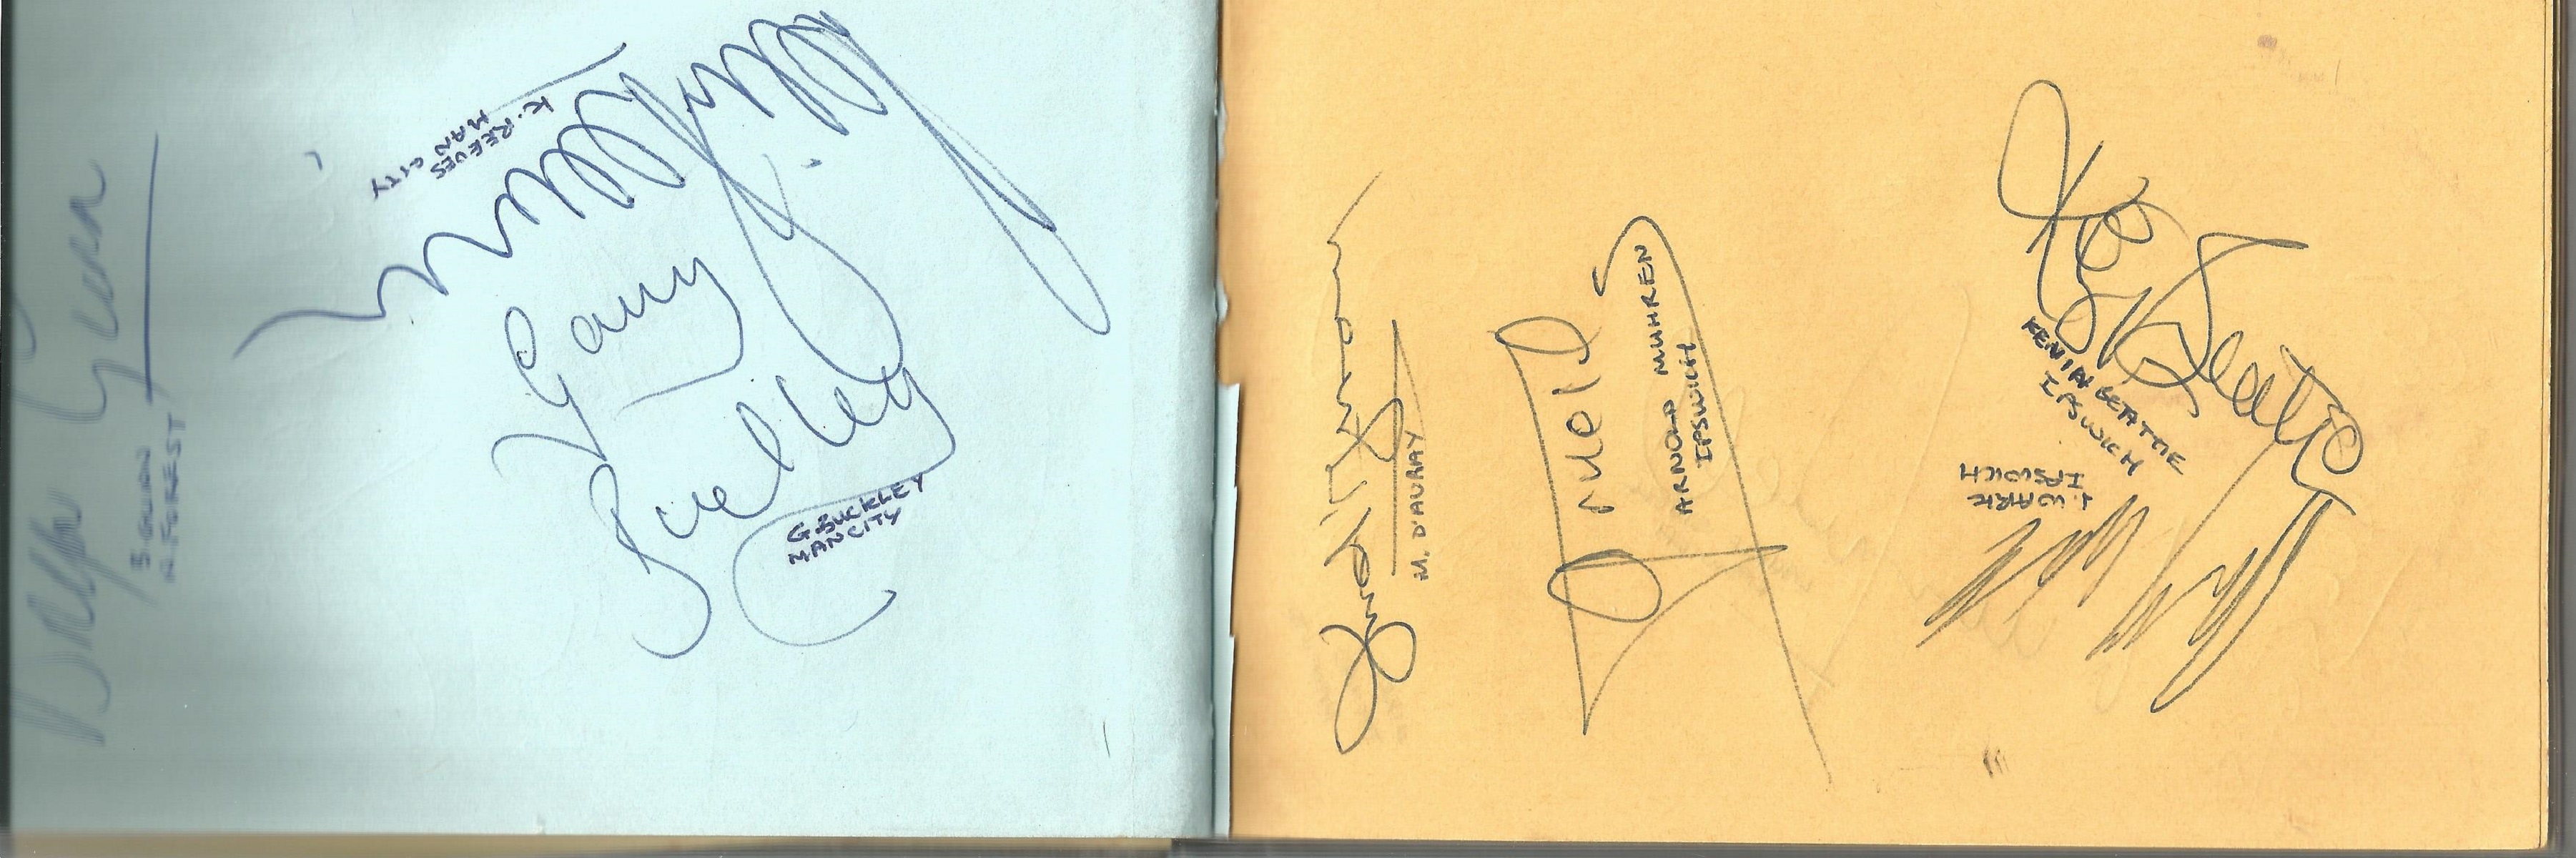 Football and Cricket Legends Autograph book over 150 signatures from some legendary names of the - Image 5 of 8